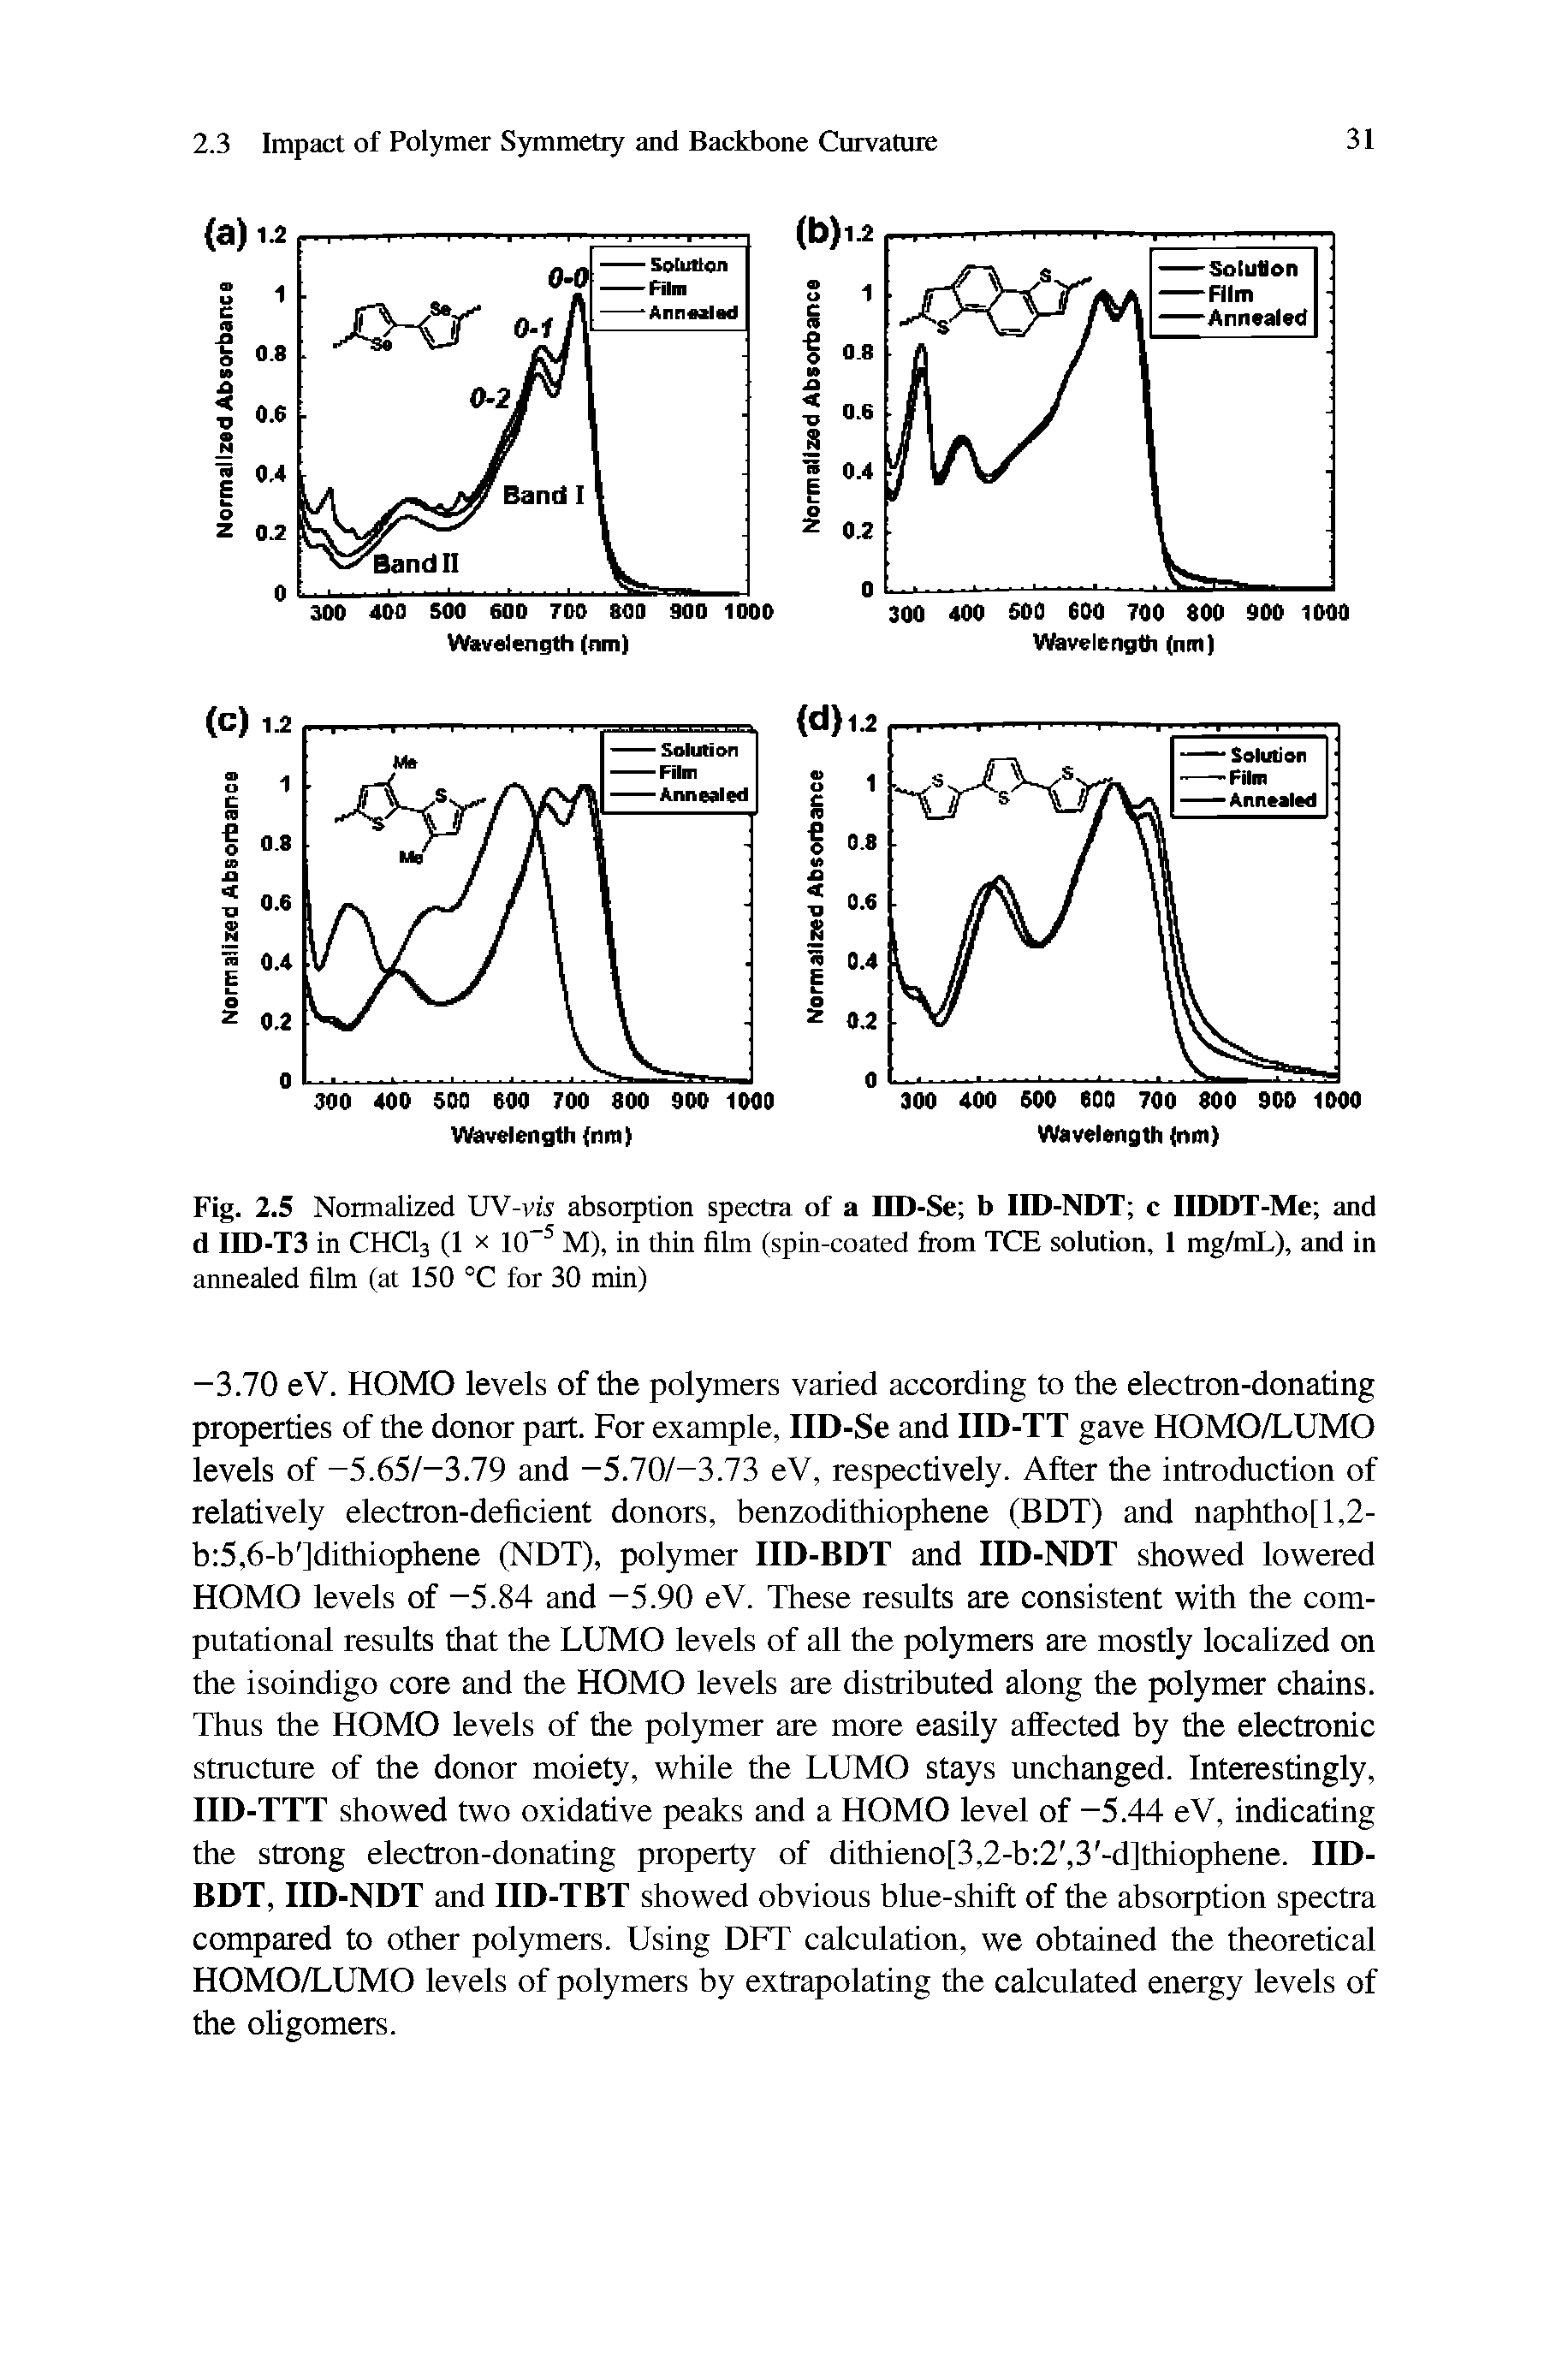 Fig. 2.5 Normalized UV-vir absorption spectra of a IID-Se b IID-NDT c IIDDT-Me and d IID-T3 in CHCI3 (1 x 10 M), in thin film (spin-coated from TCE solution, 1 mg/mL), and in annealed film (at 150 °C for 30 min)...